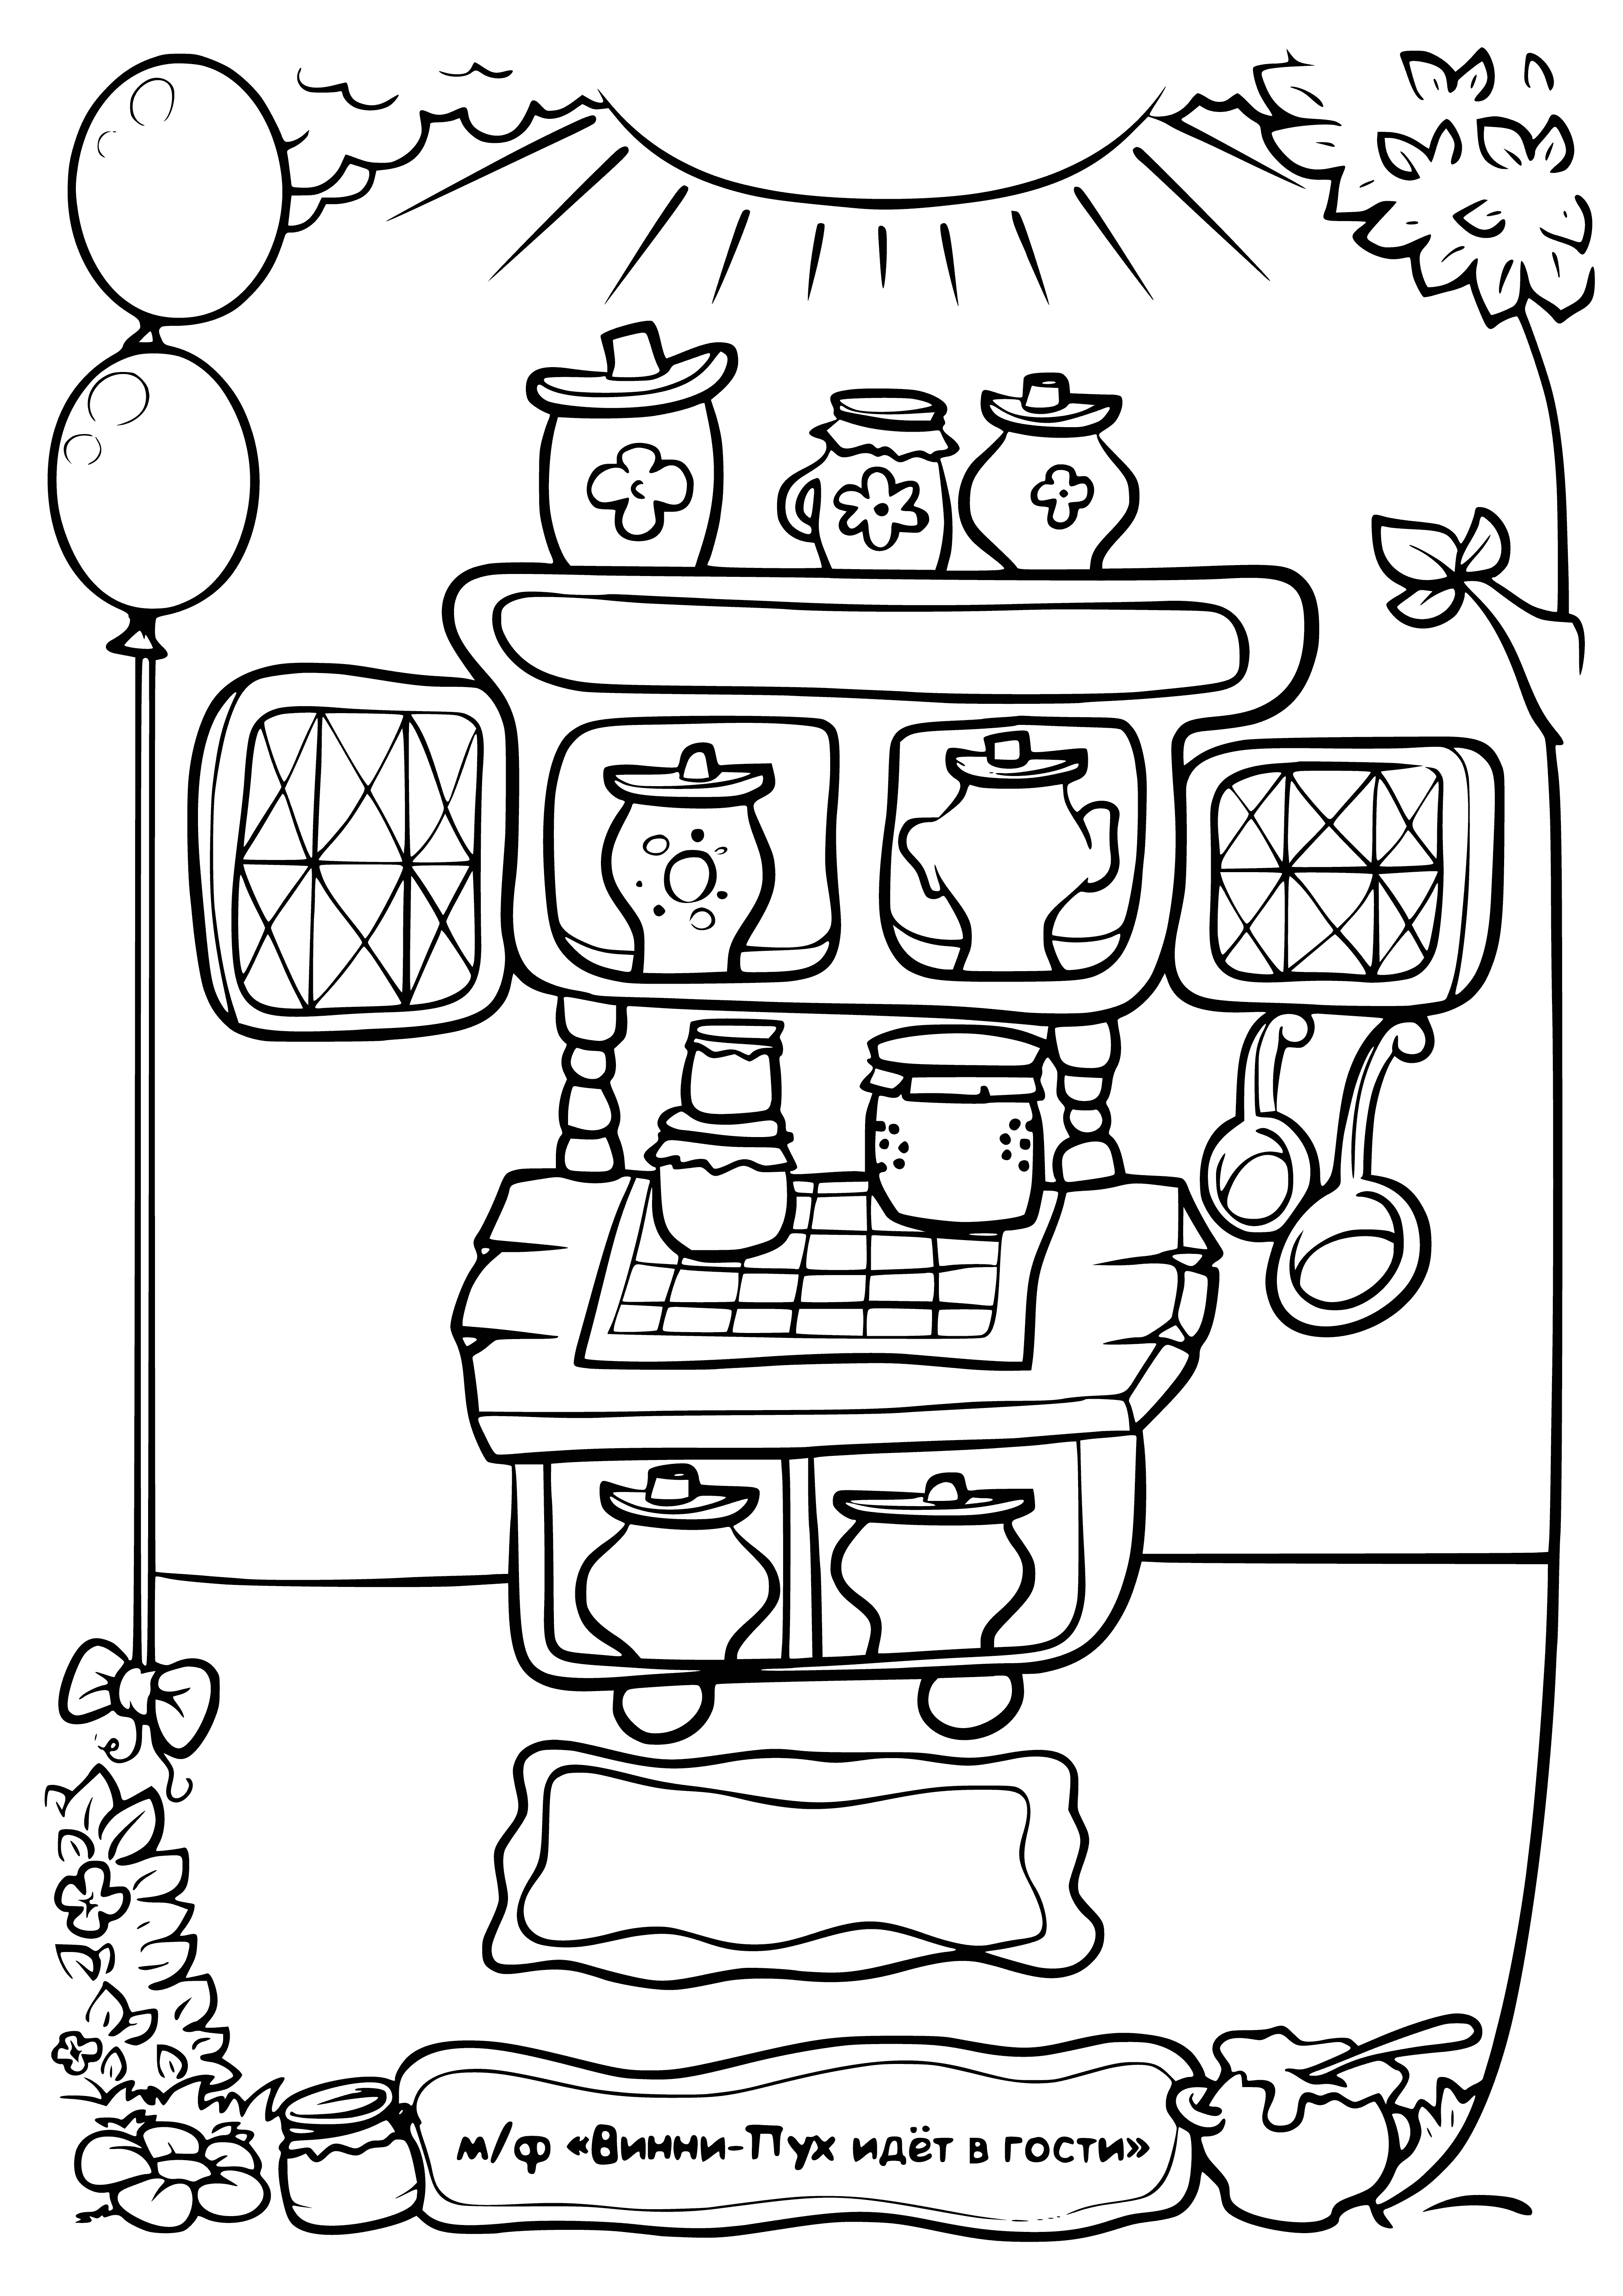 coloring page: Four golden honey pots on a white plate, with a white cloth and matching spoons. Labels on each read "Hunny". #honeypot #bees